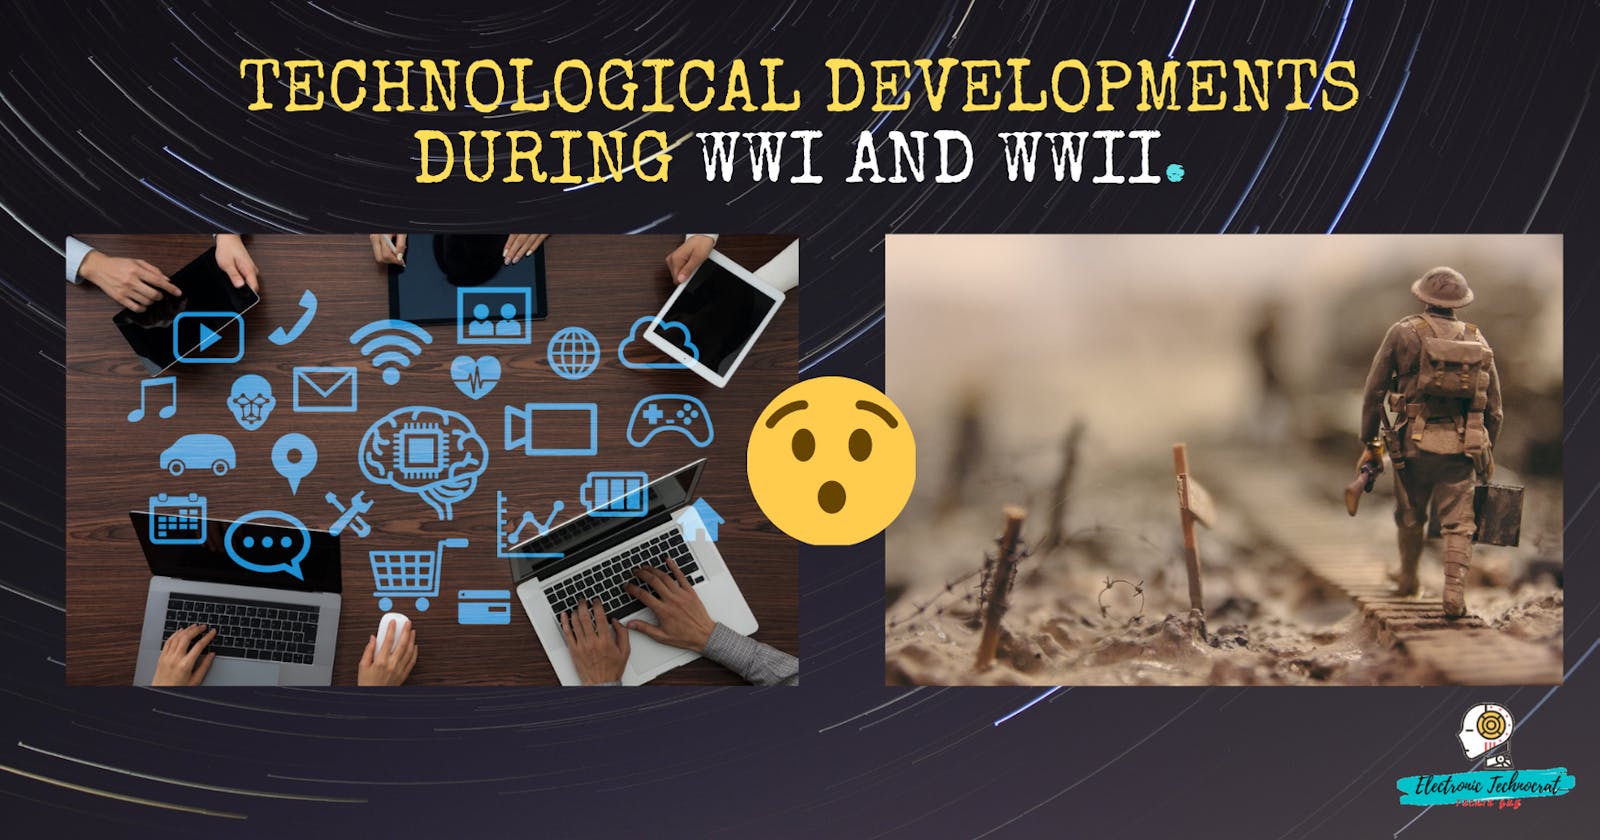 Technological developments during WWI and WWII.